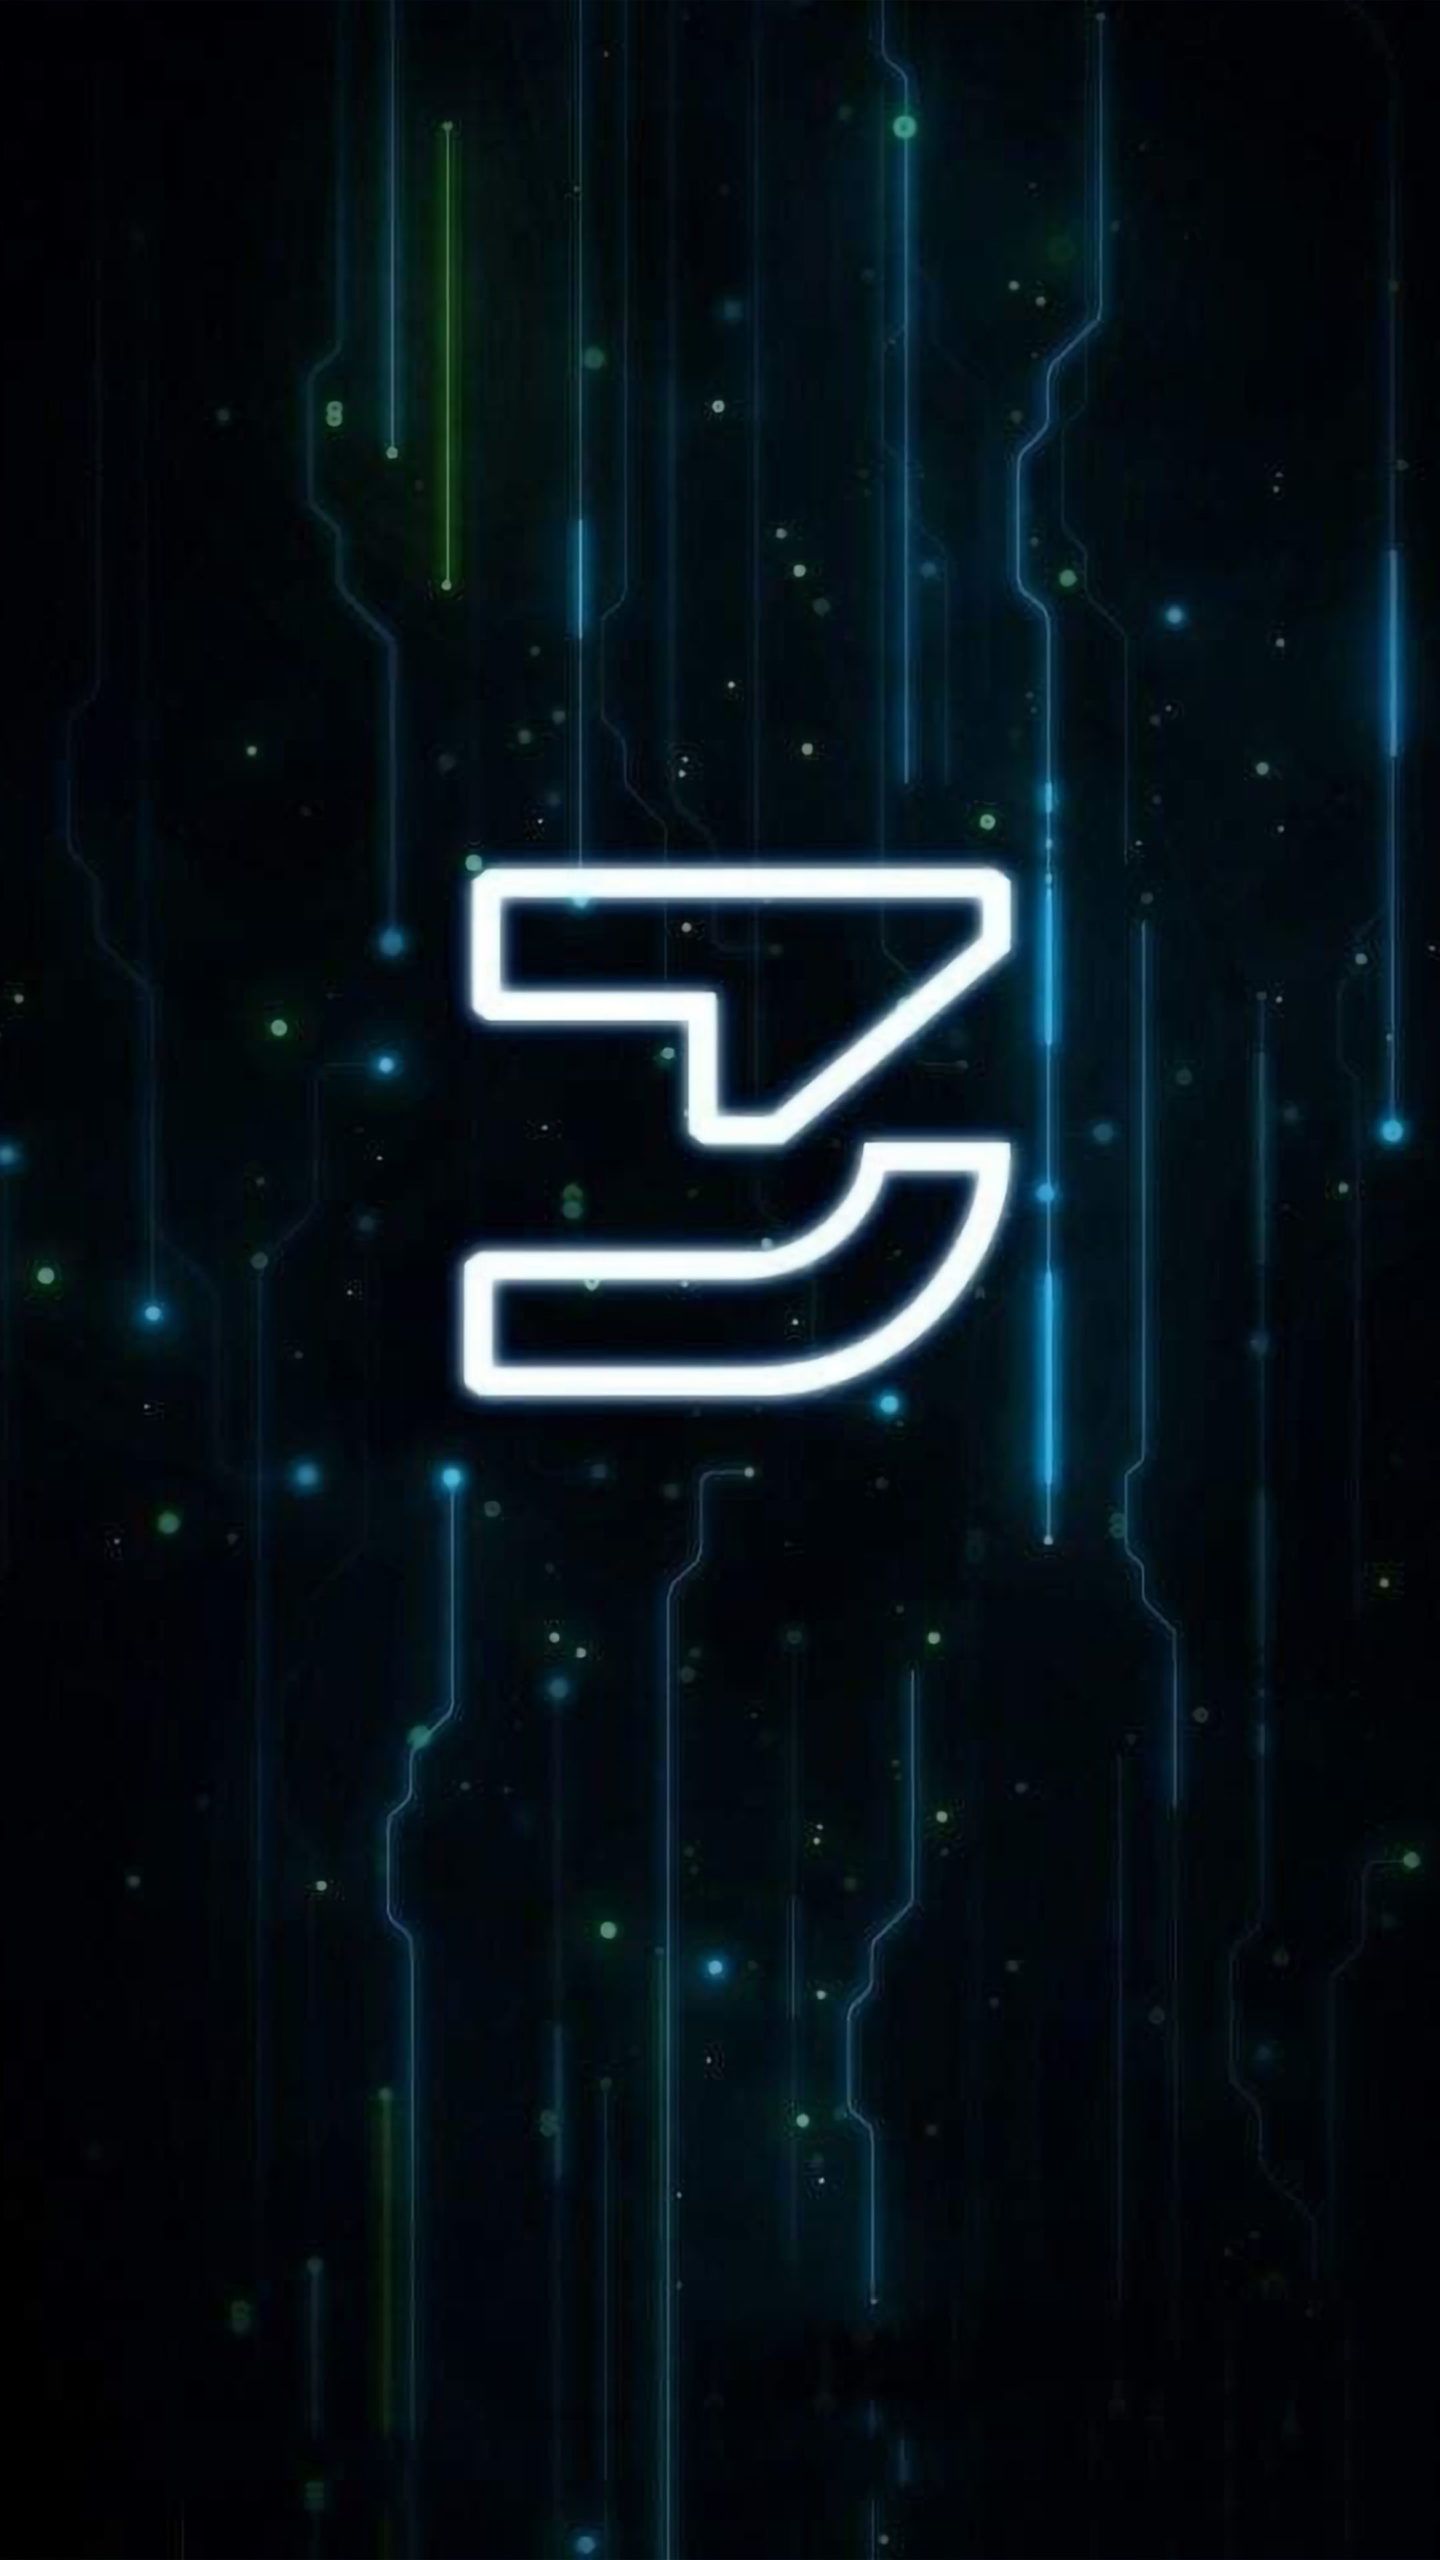 Tron 3 Ares Game Logo 2021 4K Ultra HD Mobile Wallpaper. Game logo, Wallpaper, Mobile wallpaper